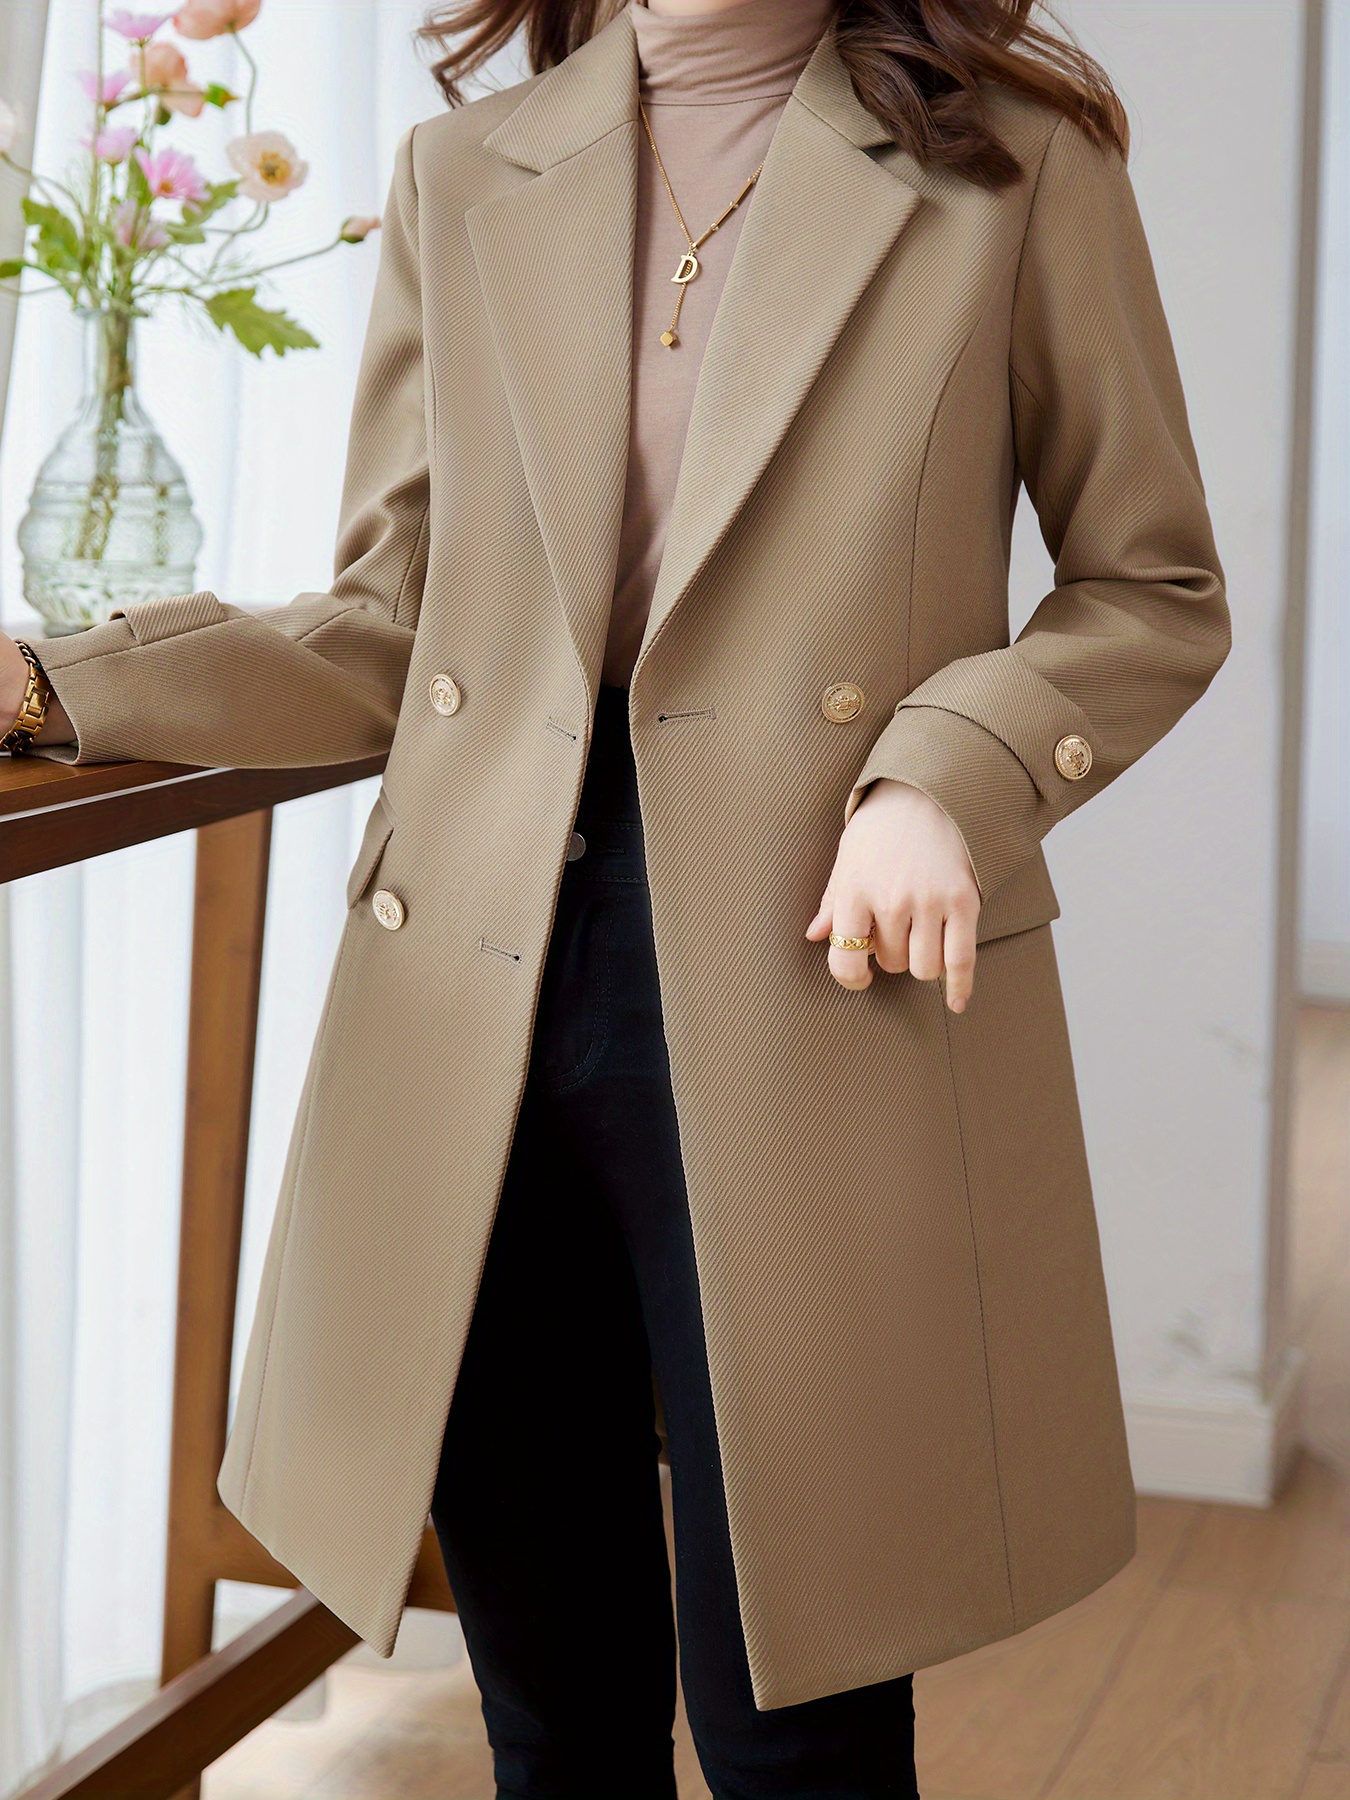 solid double breasted lapel overcoat elegant long sleeve mid length coat for fall winter womens clothing details 14